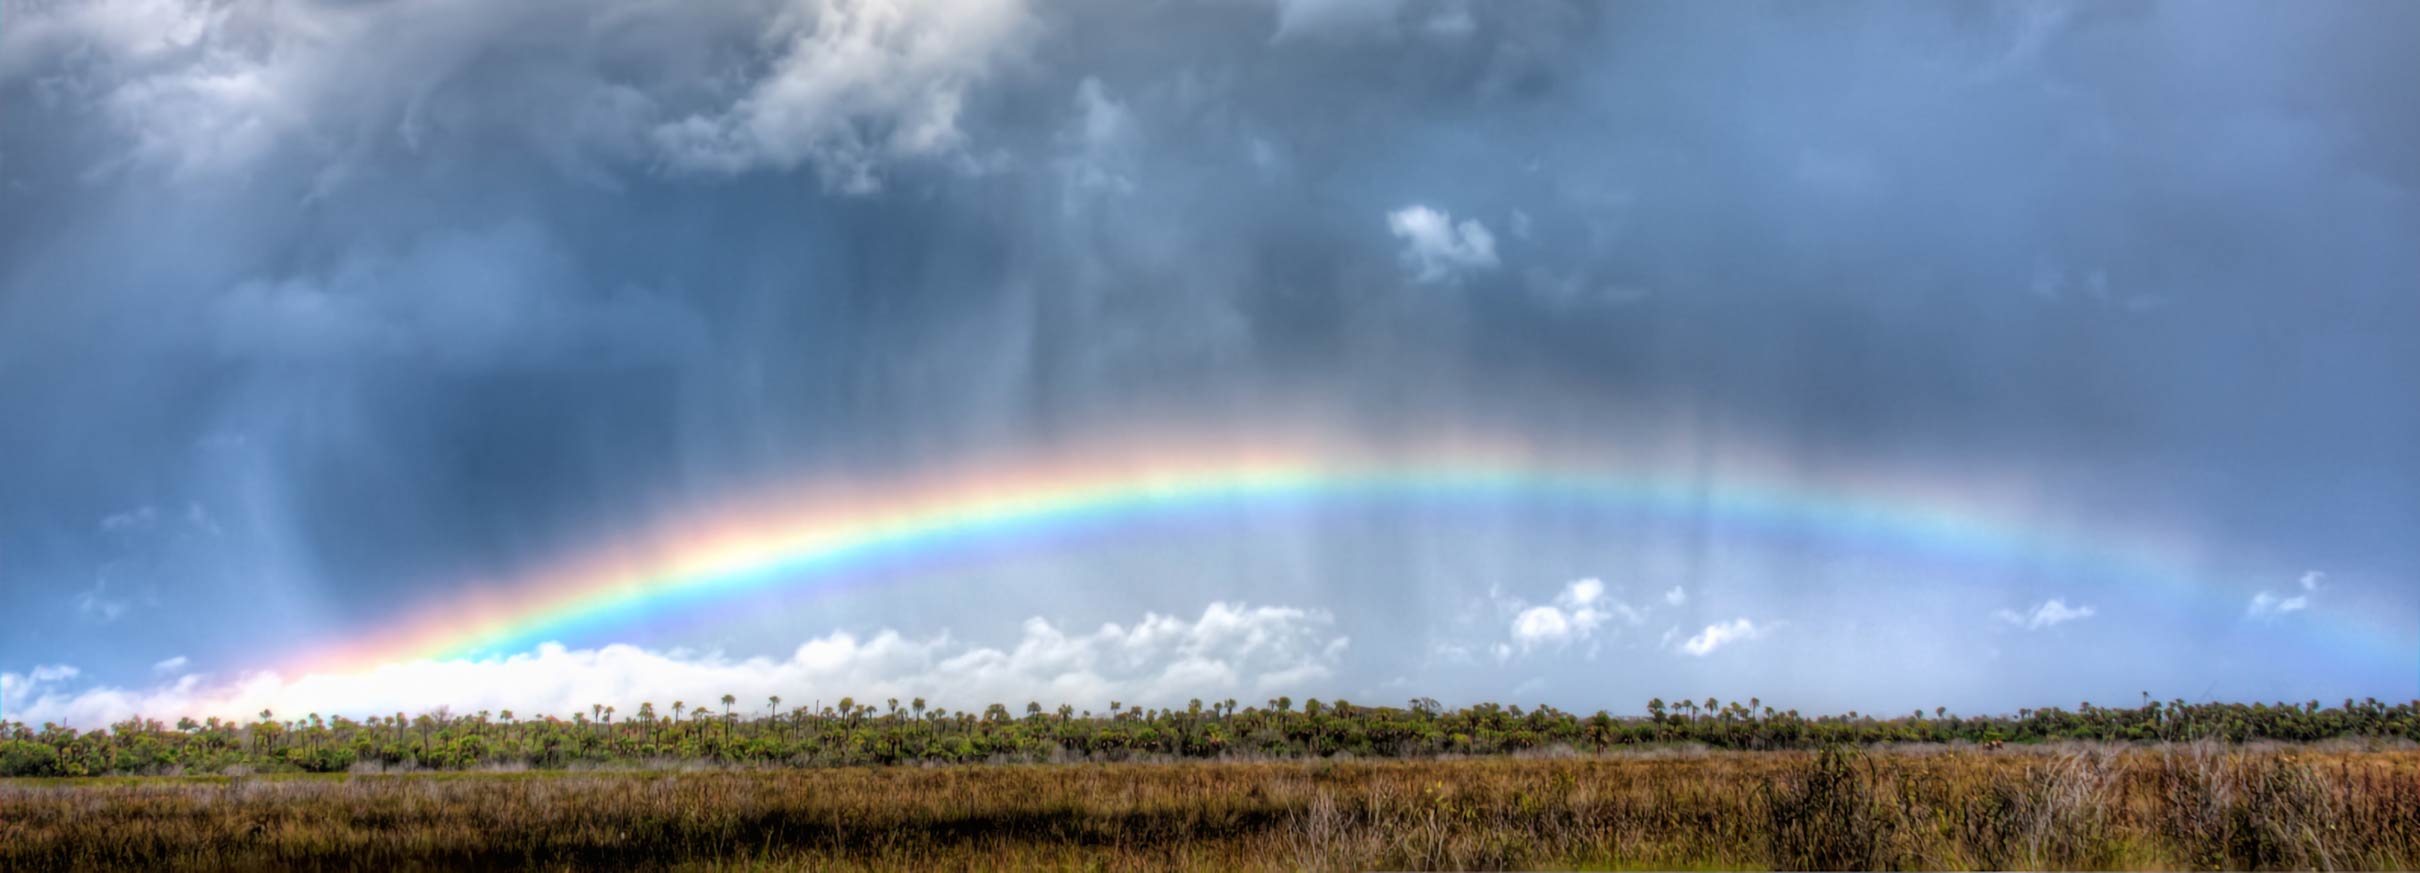 Rainbow and Clouds, Big Cypress National Preserve, Southern Florida